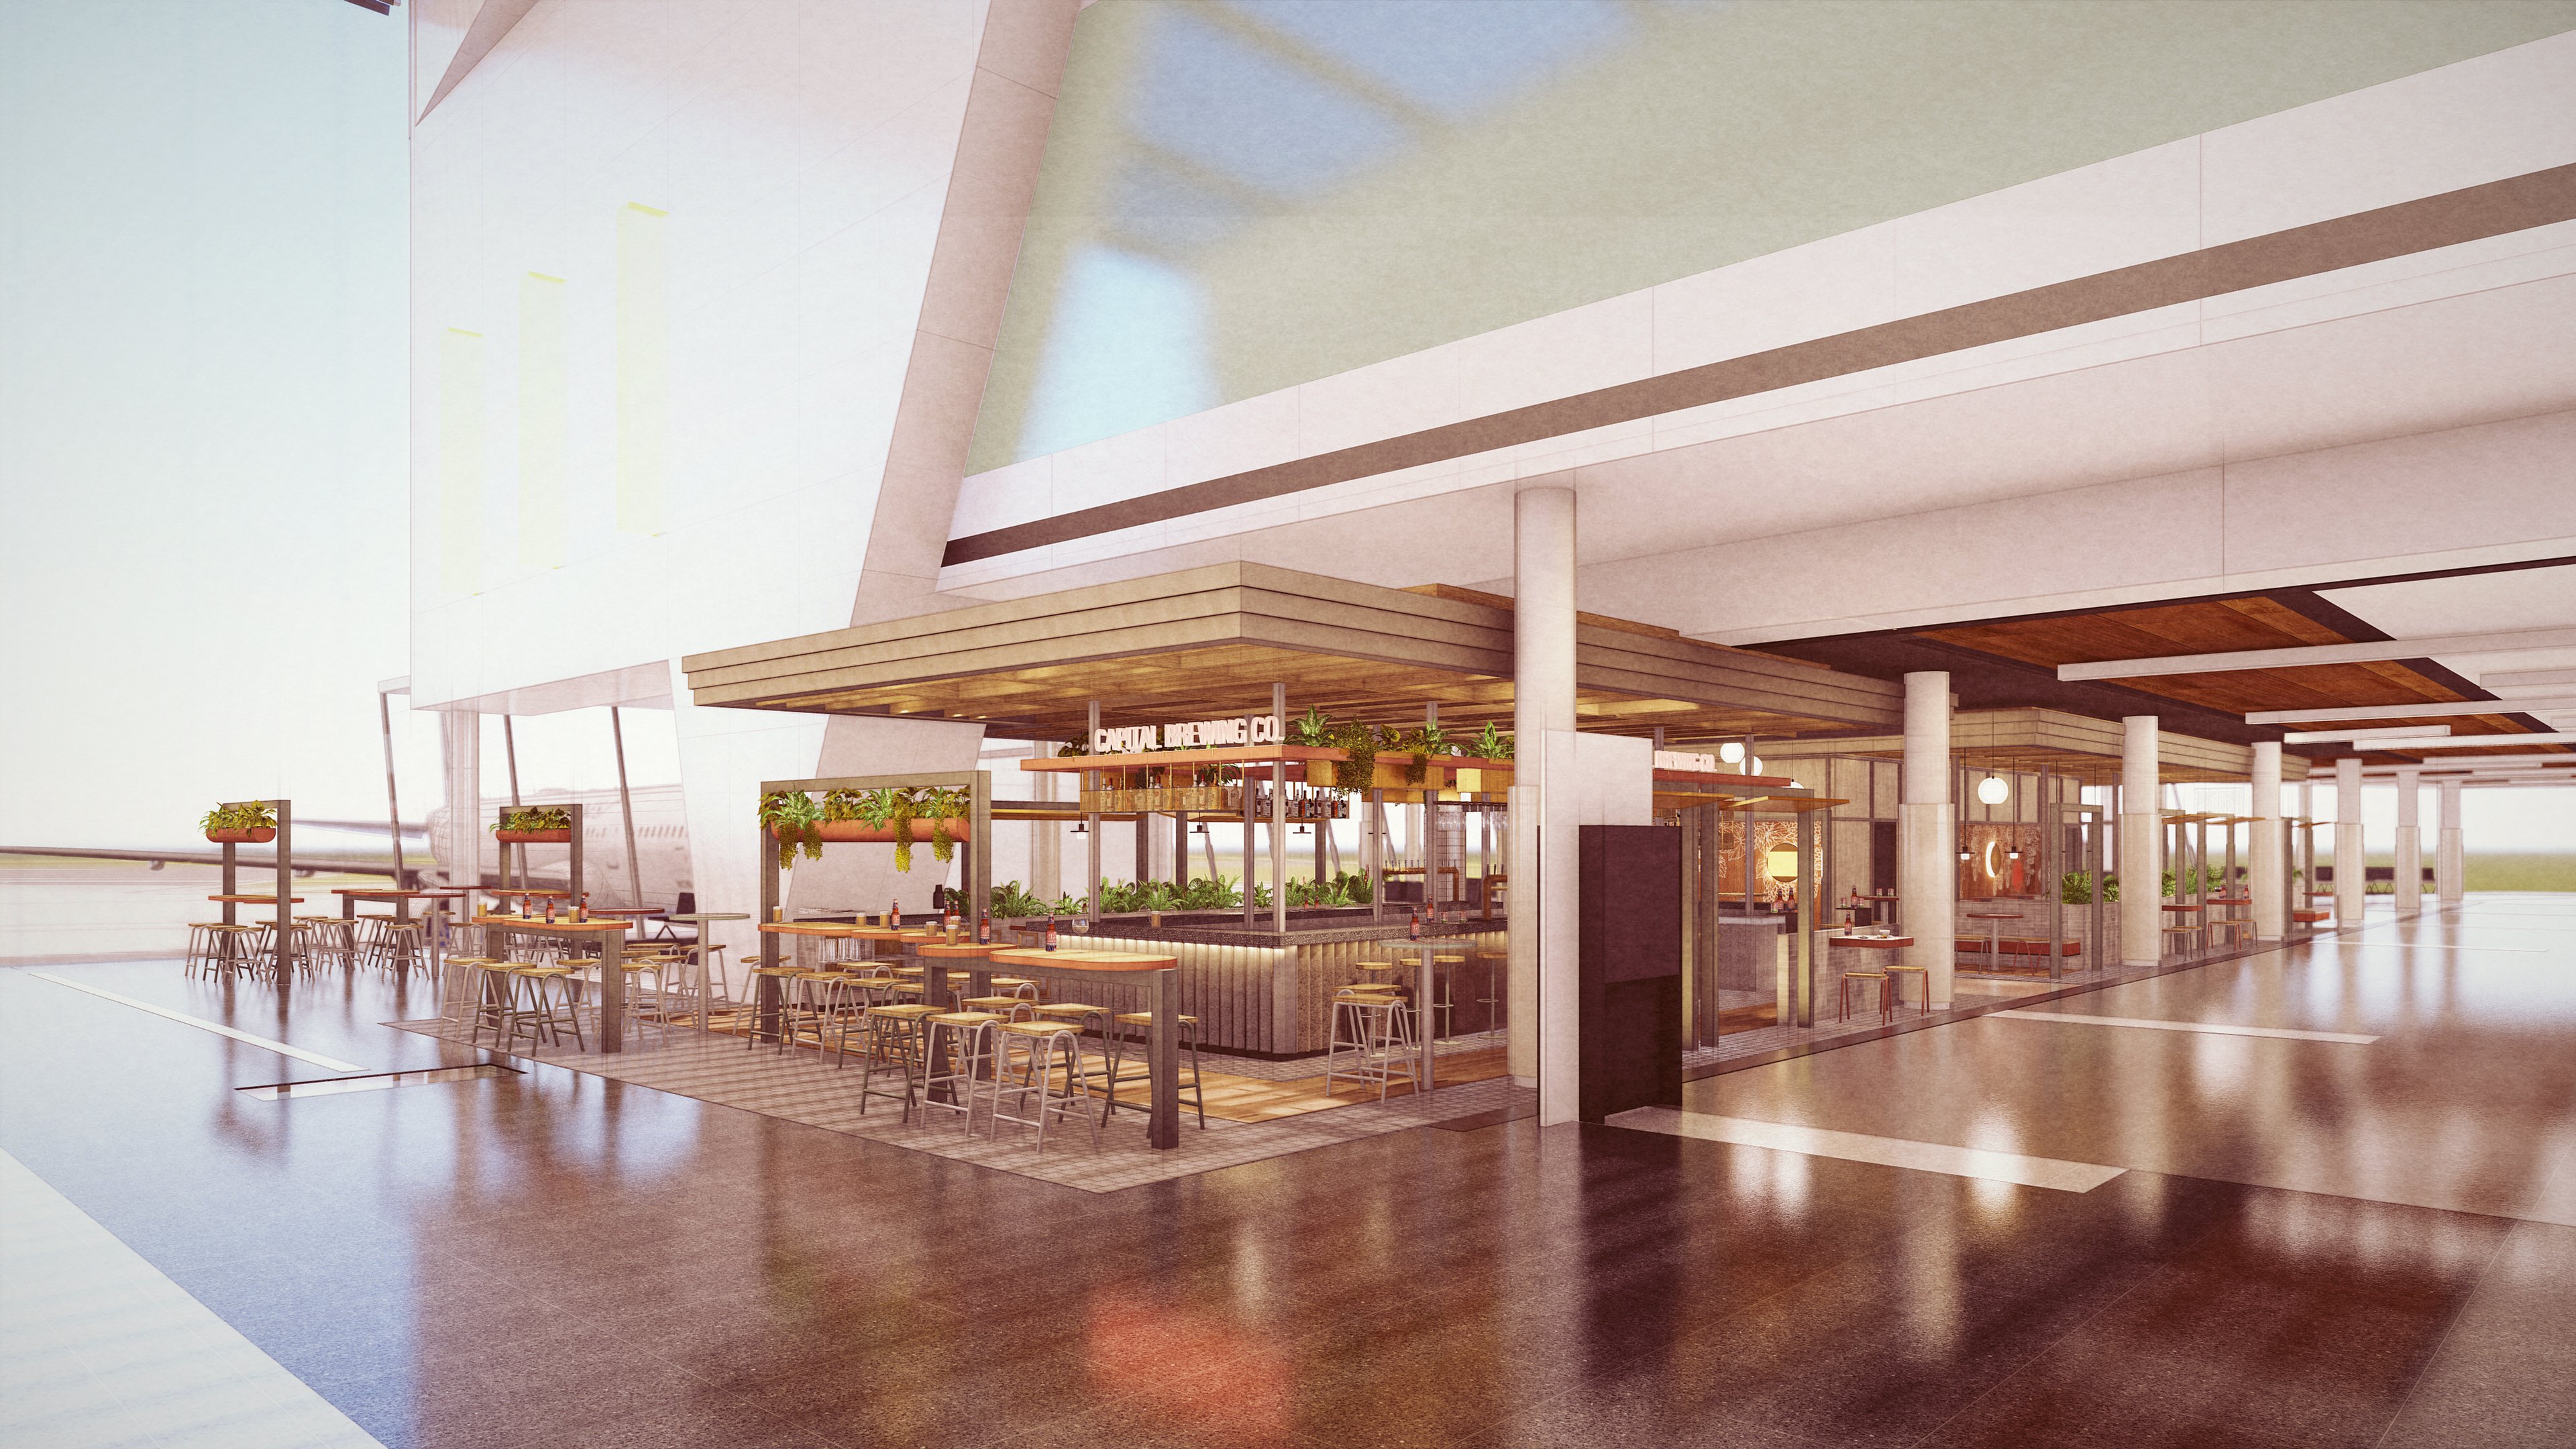 Canberra Airport overhauls main terminal with new retail and eating options